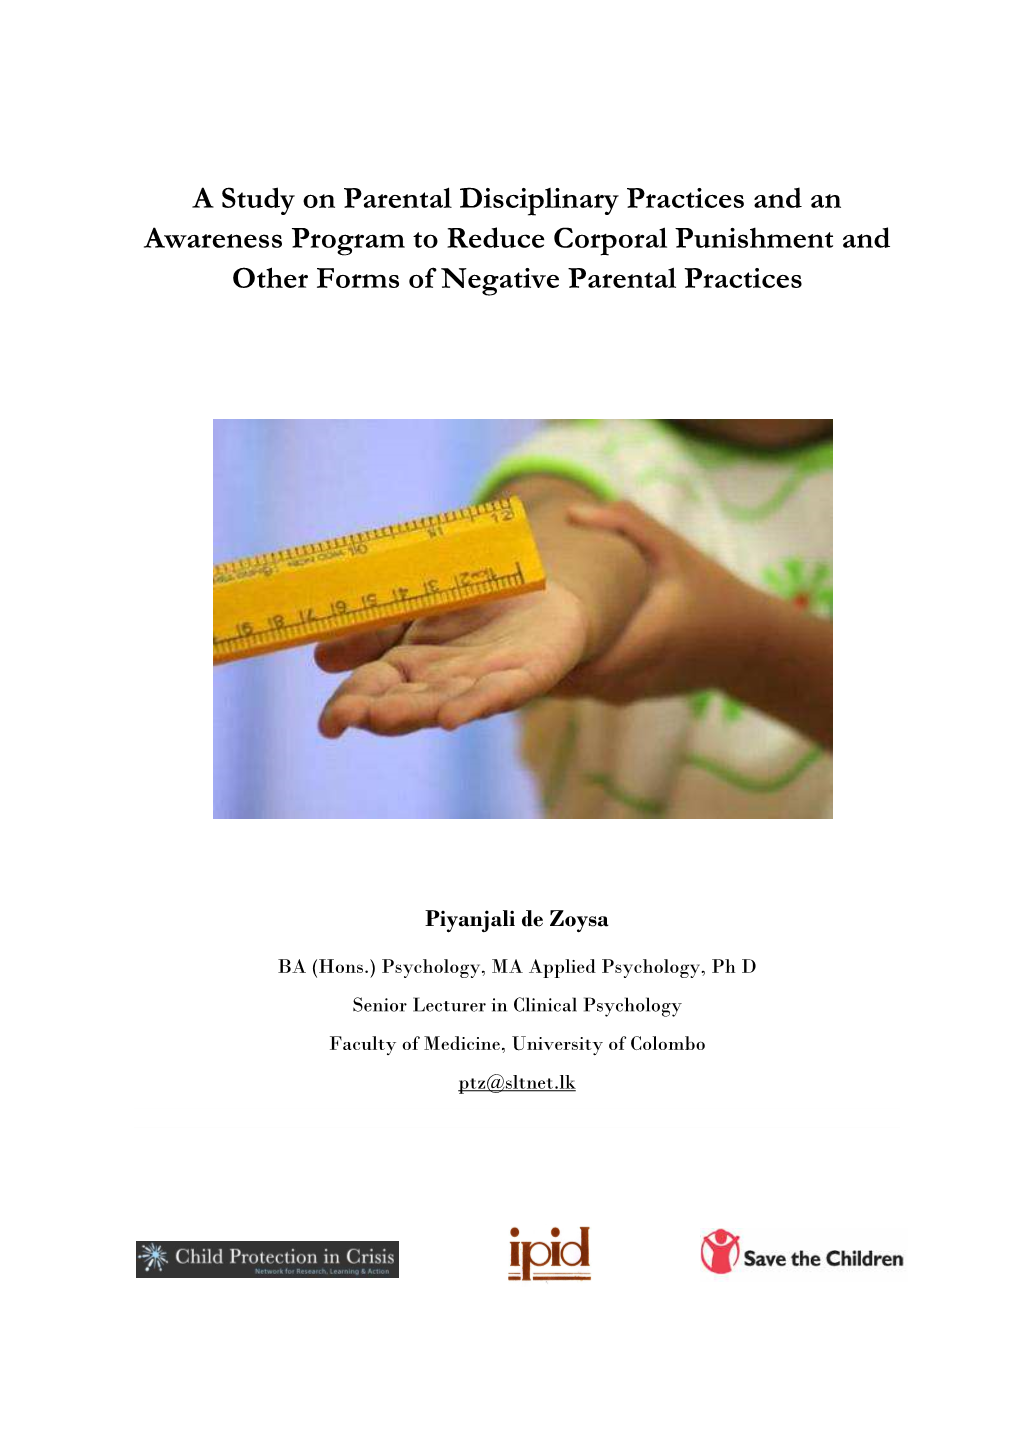 A Study on Parental Disciplinary Practices and an Awareness Program to Reduce Corporal Punishment and Other Forms of Negative Parental Practices